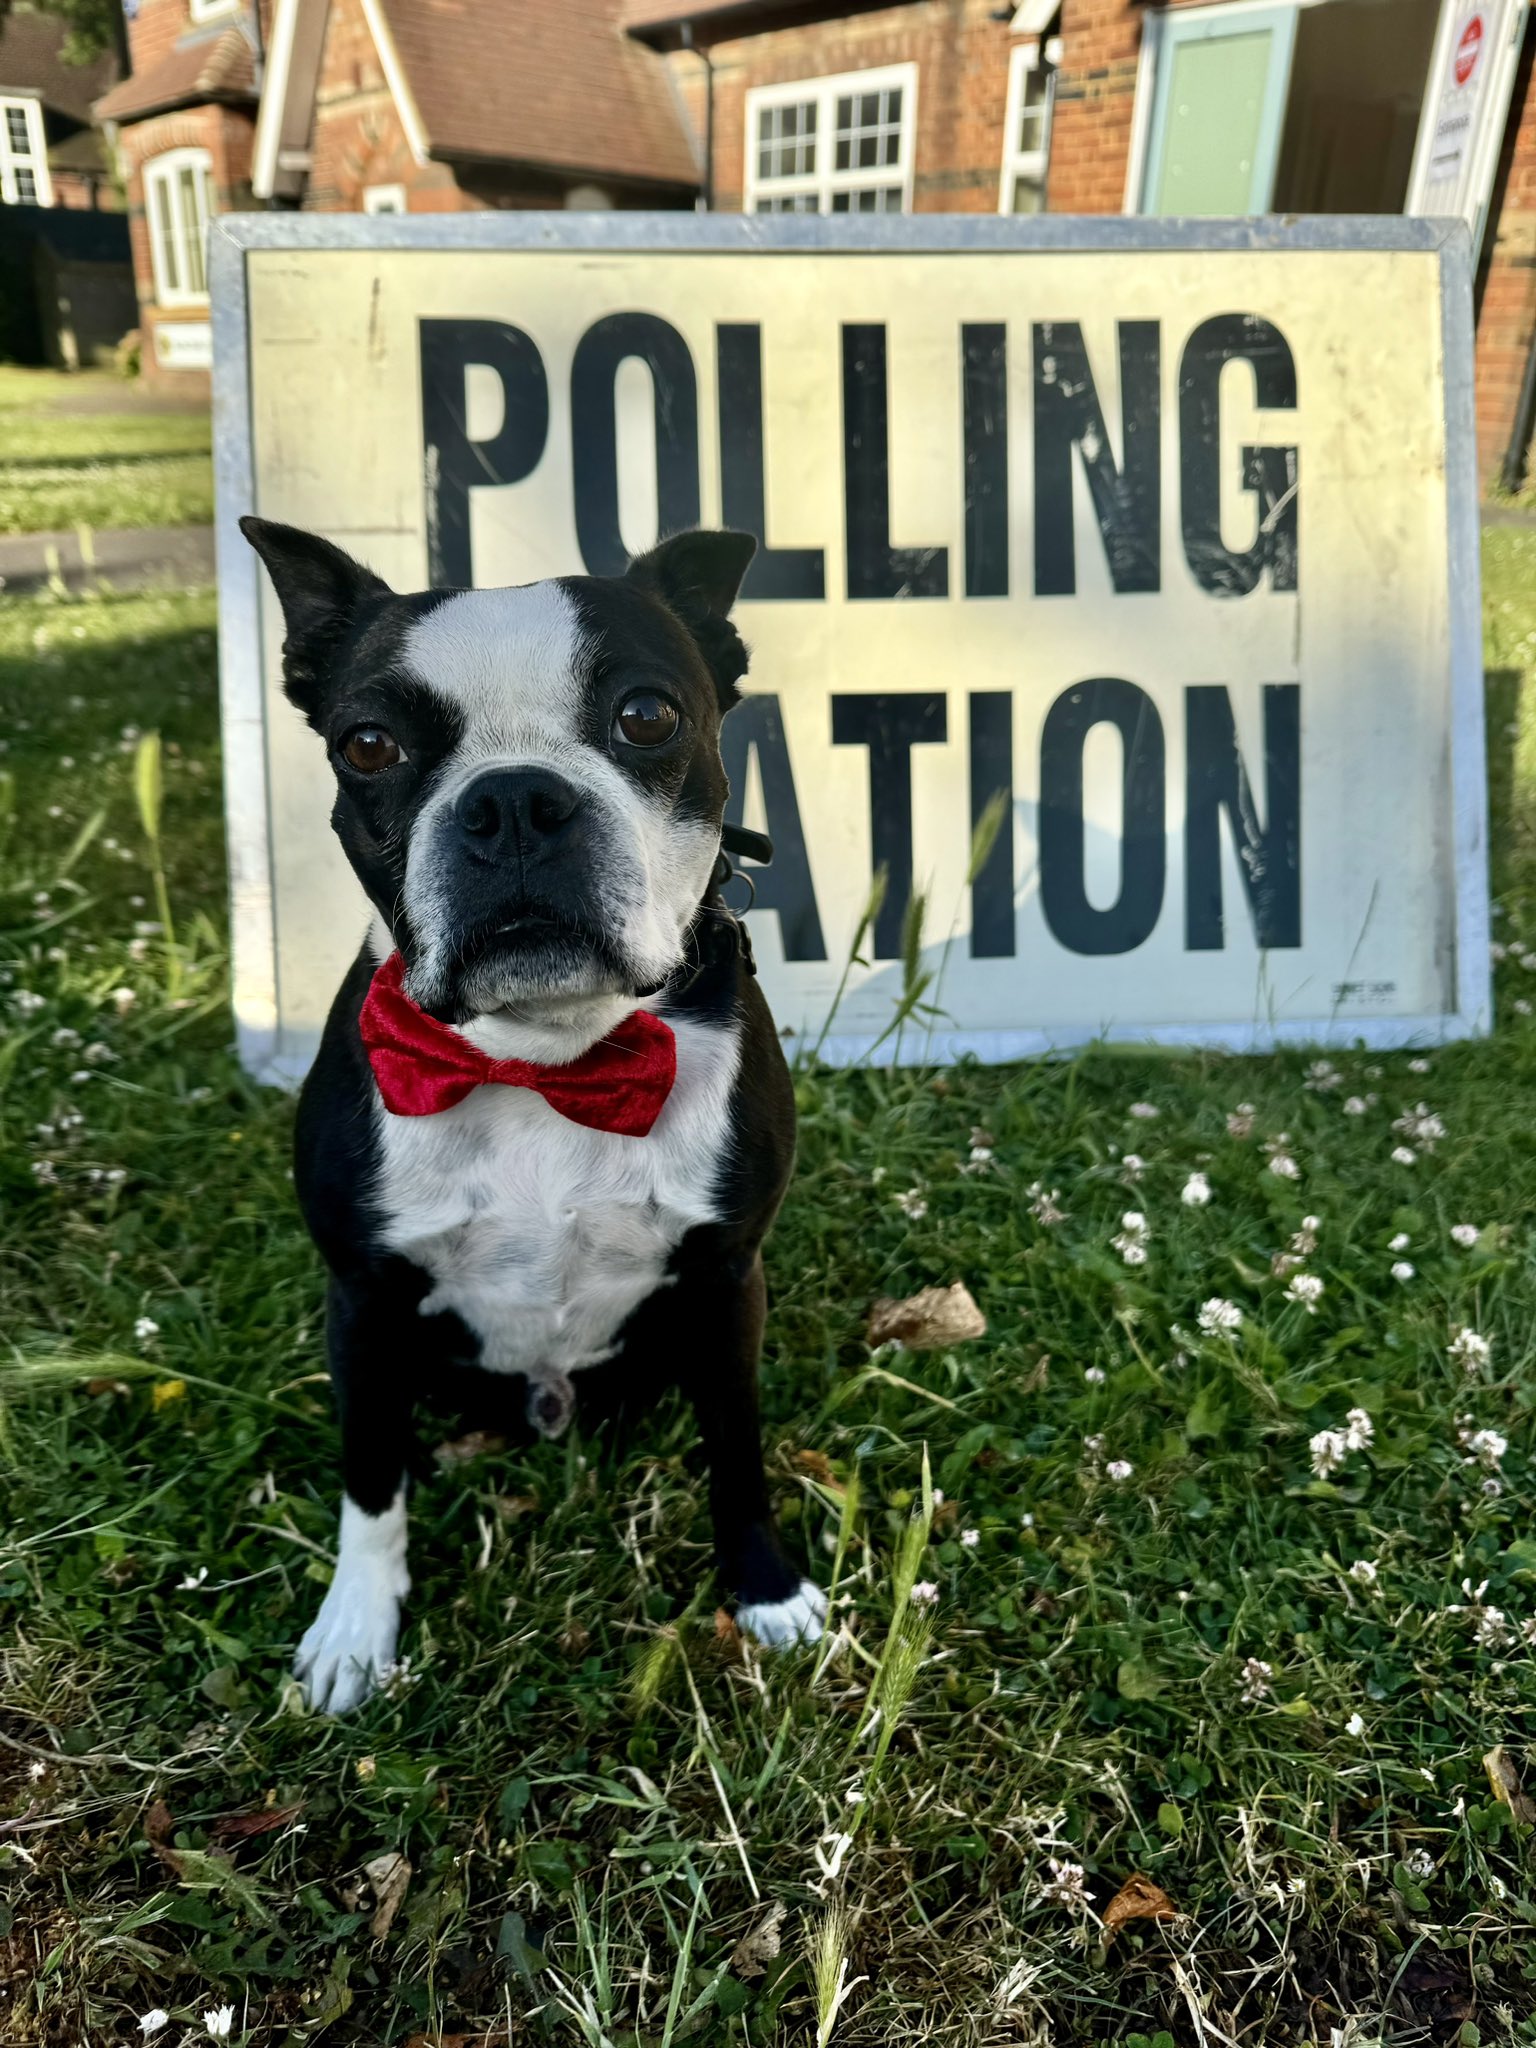 A dog standing on grass in front of a polling station sign